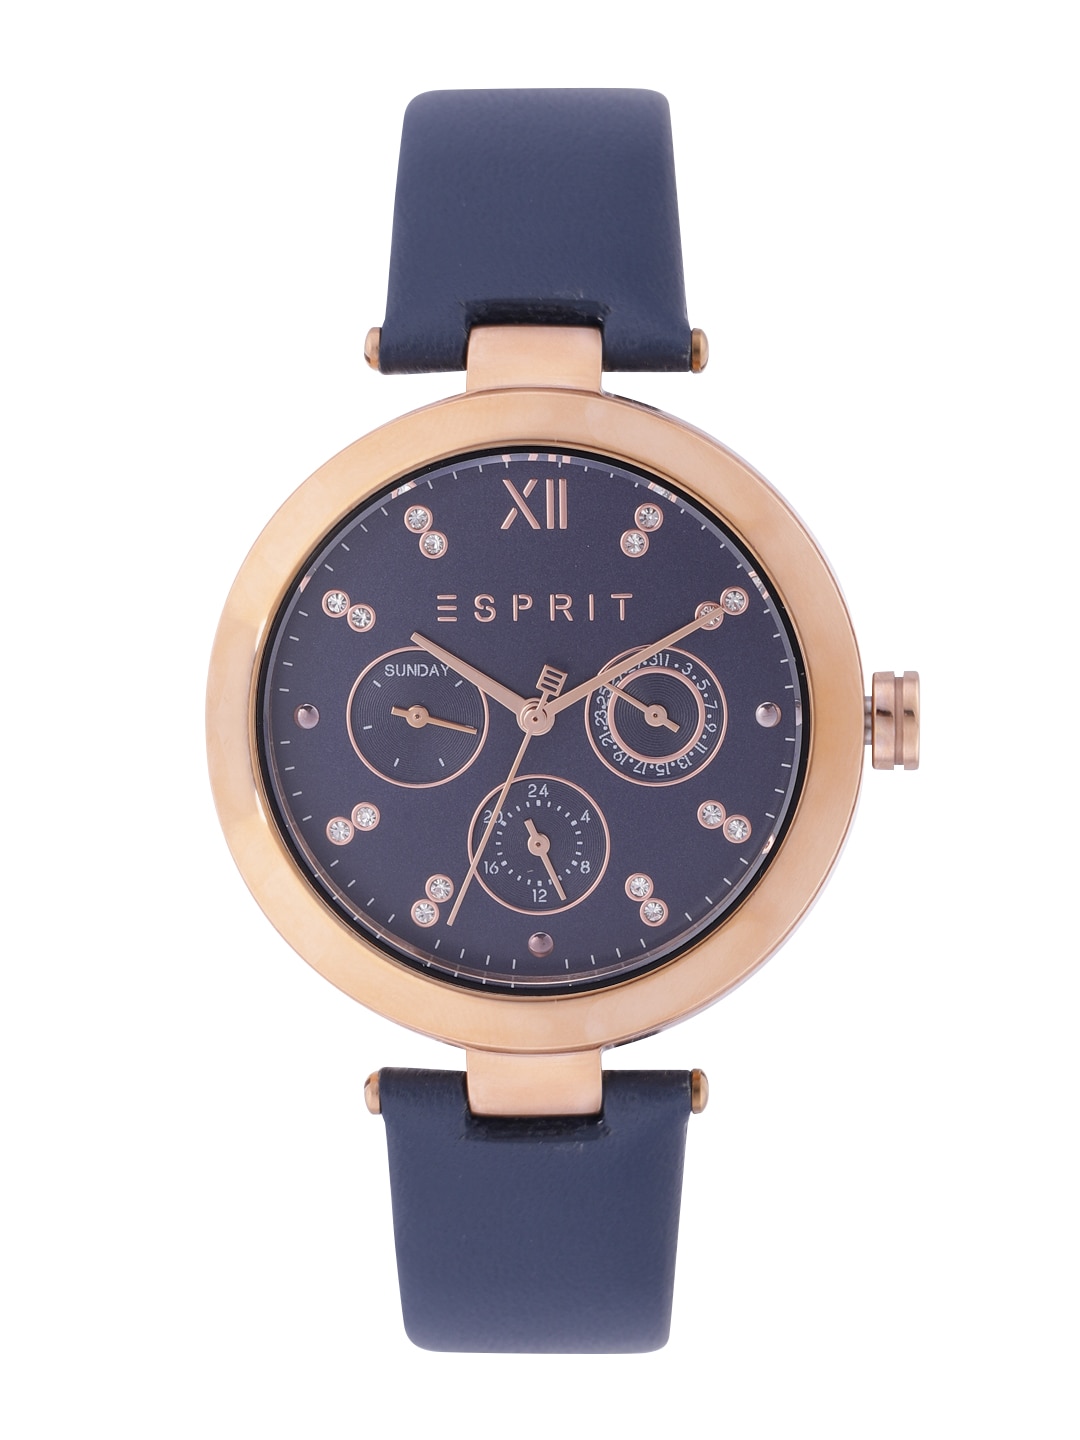 ESPRIT Women Navy Blue Dial & Leather Straps Analogue Watch ES1L213L0035 Price in India